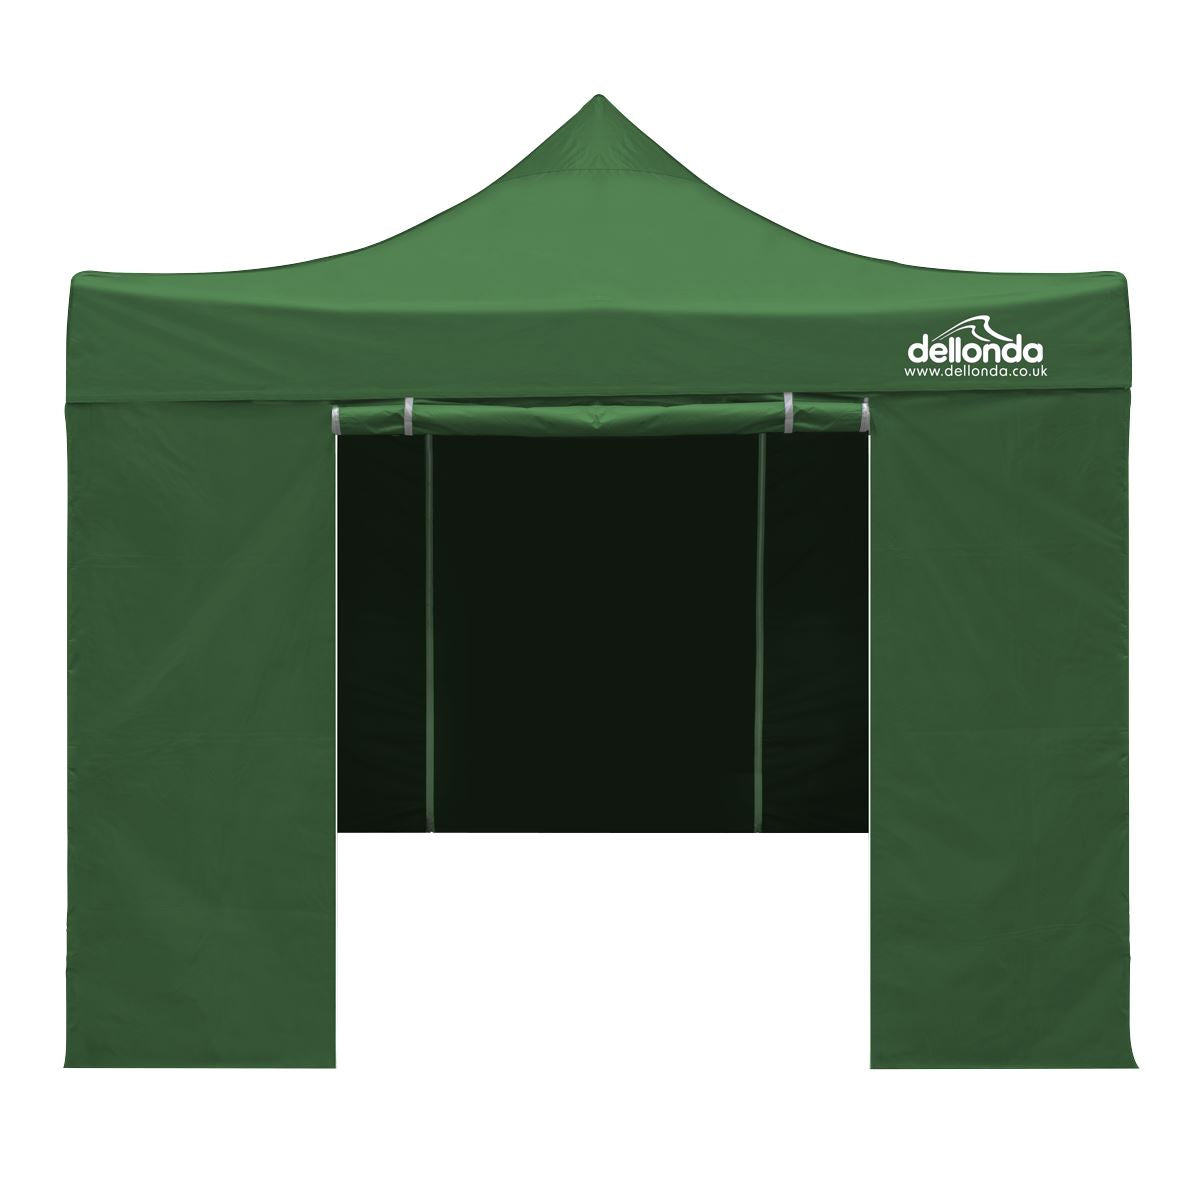 Dellonda Premium 3x3m Pop-Up Gazebo & Side Walls, PVC Coated, Water Resistant Fabric with Carry Bag, Rope, Stakes & Weight Bags - Green